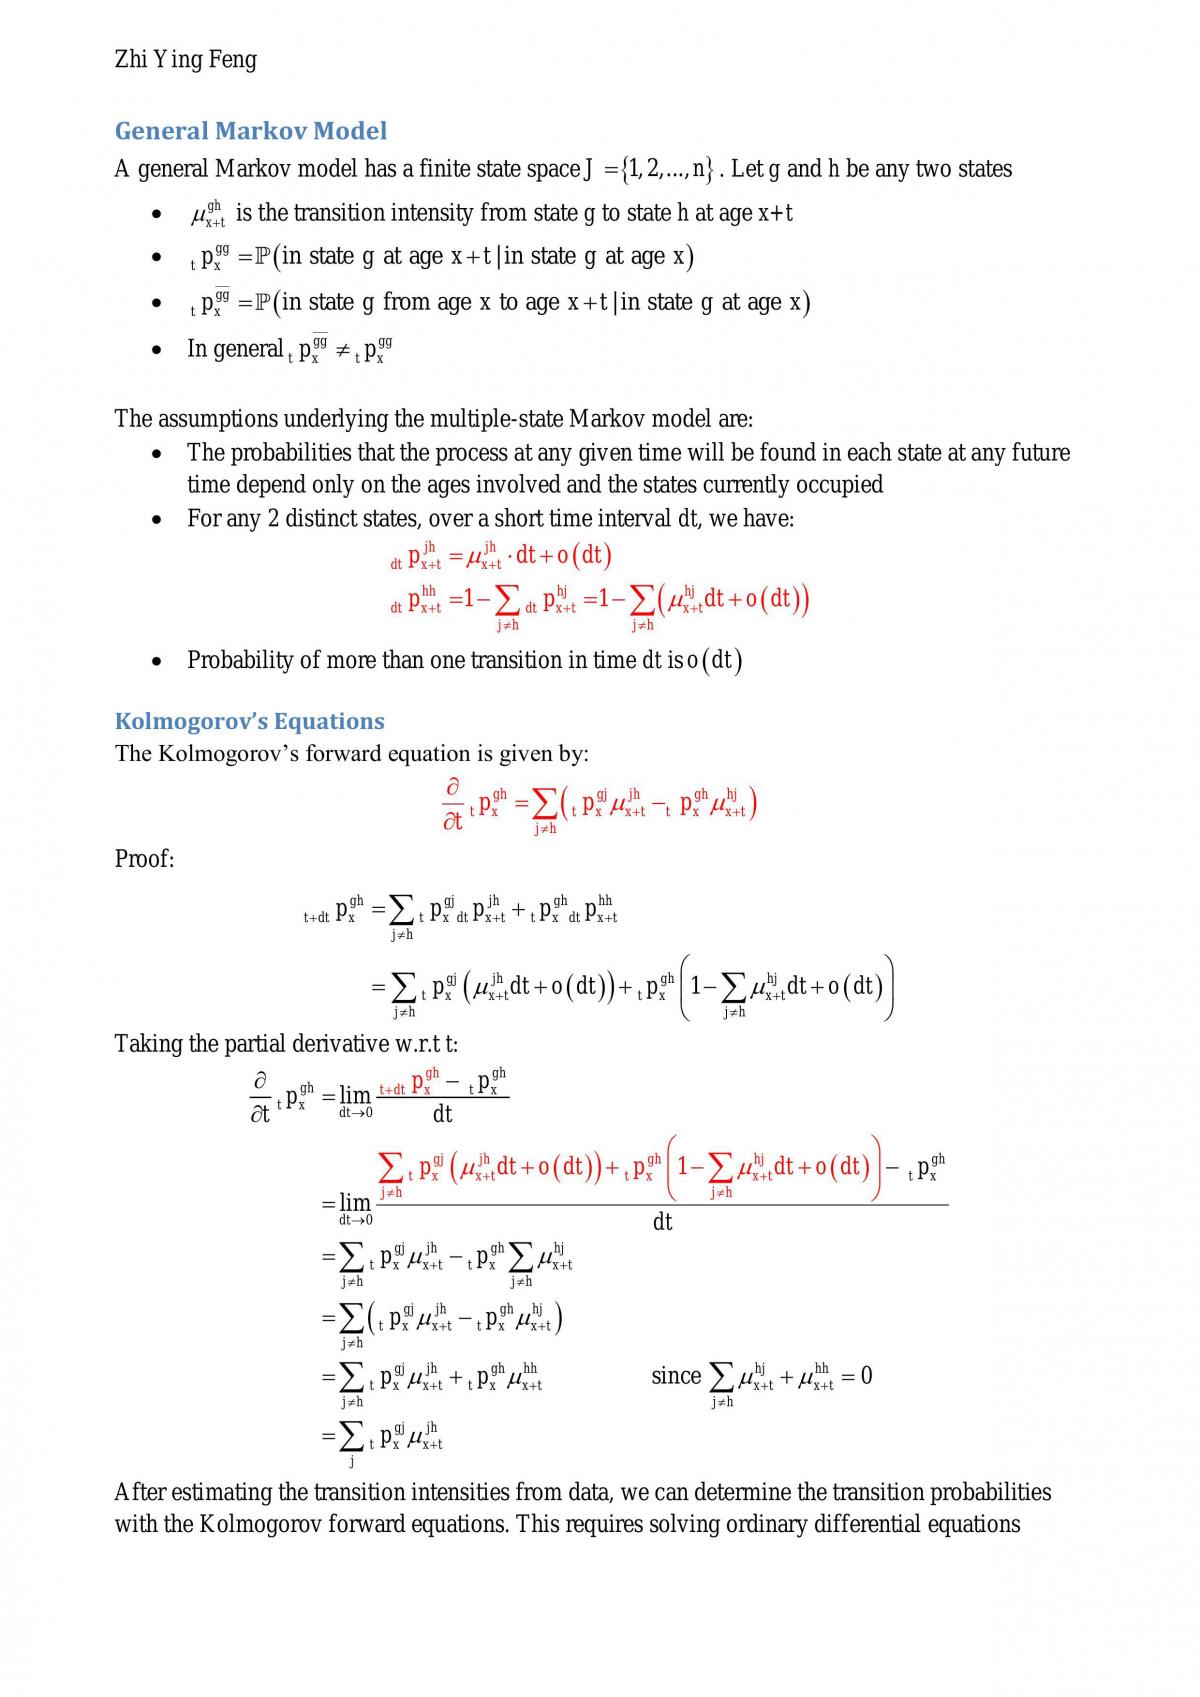 Full Course Notes - Page 26